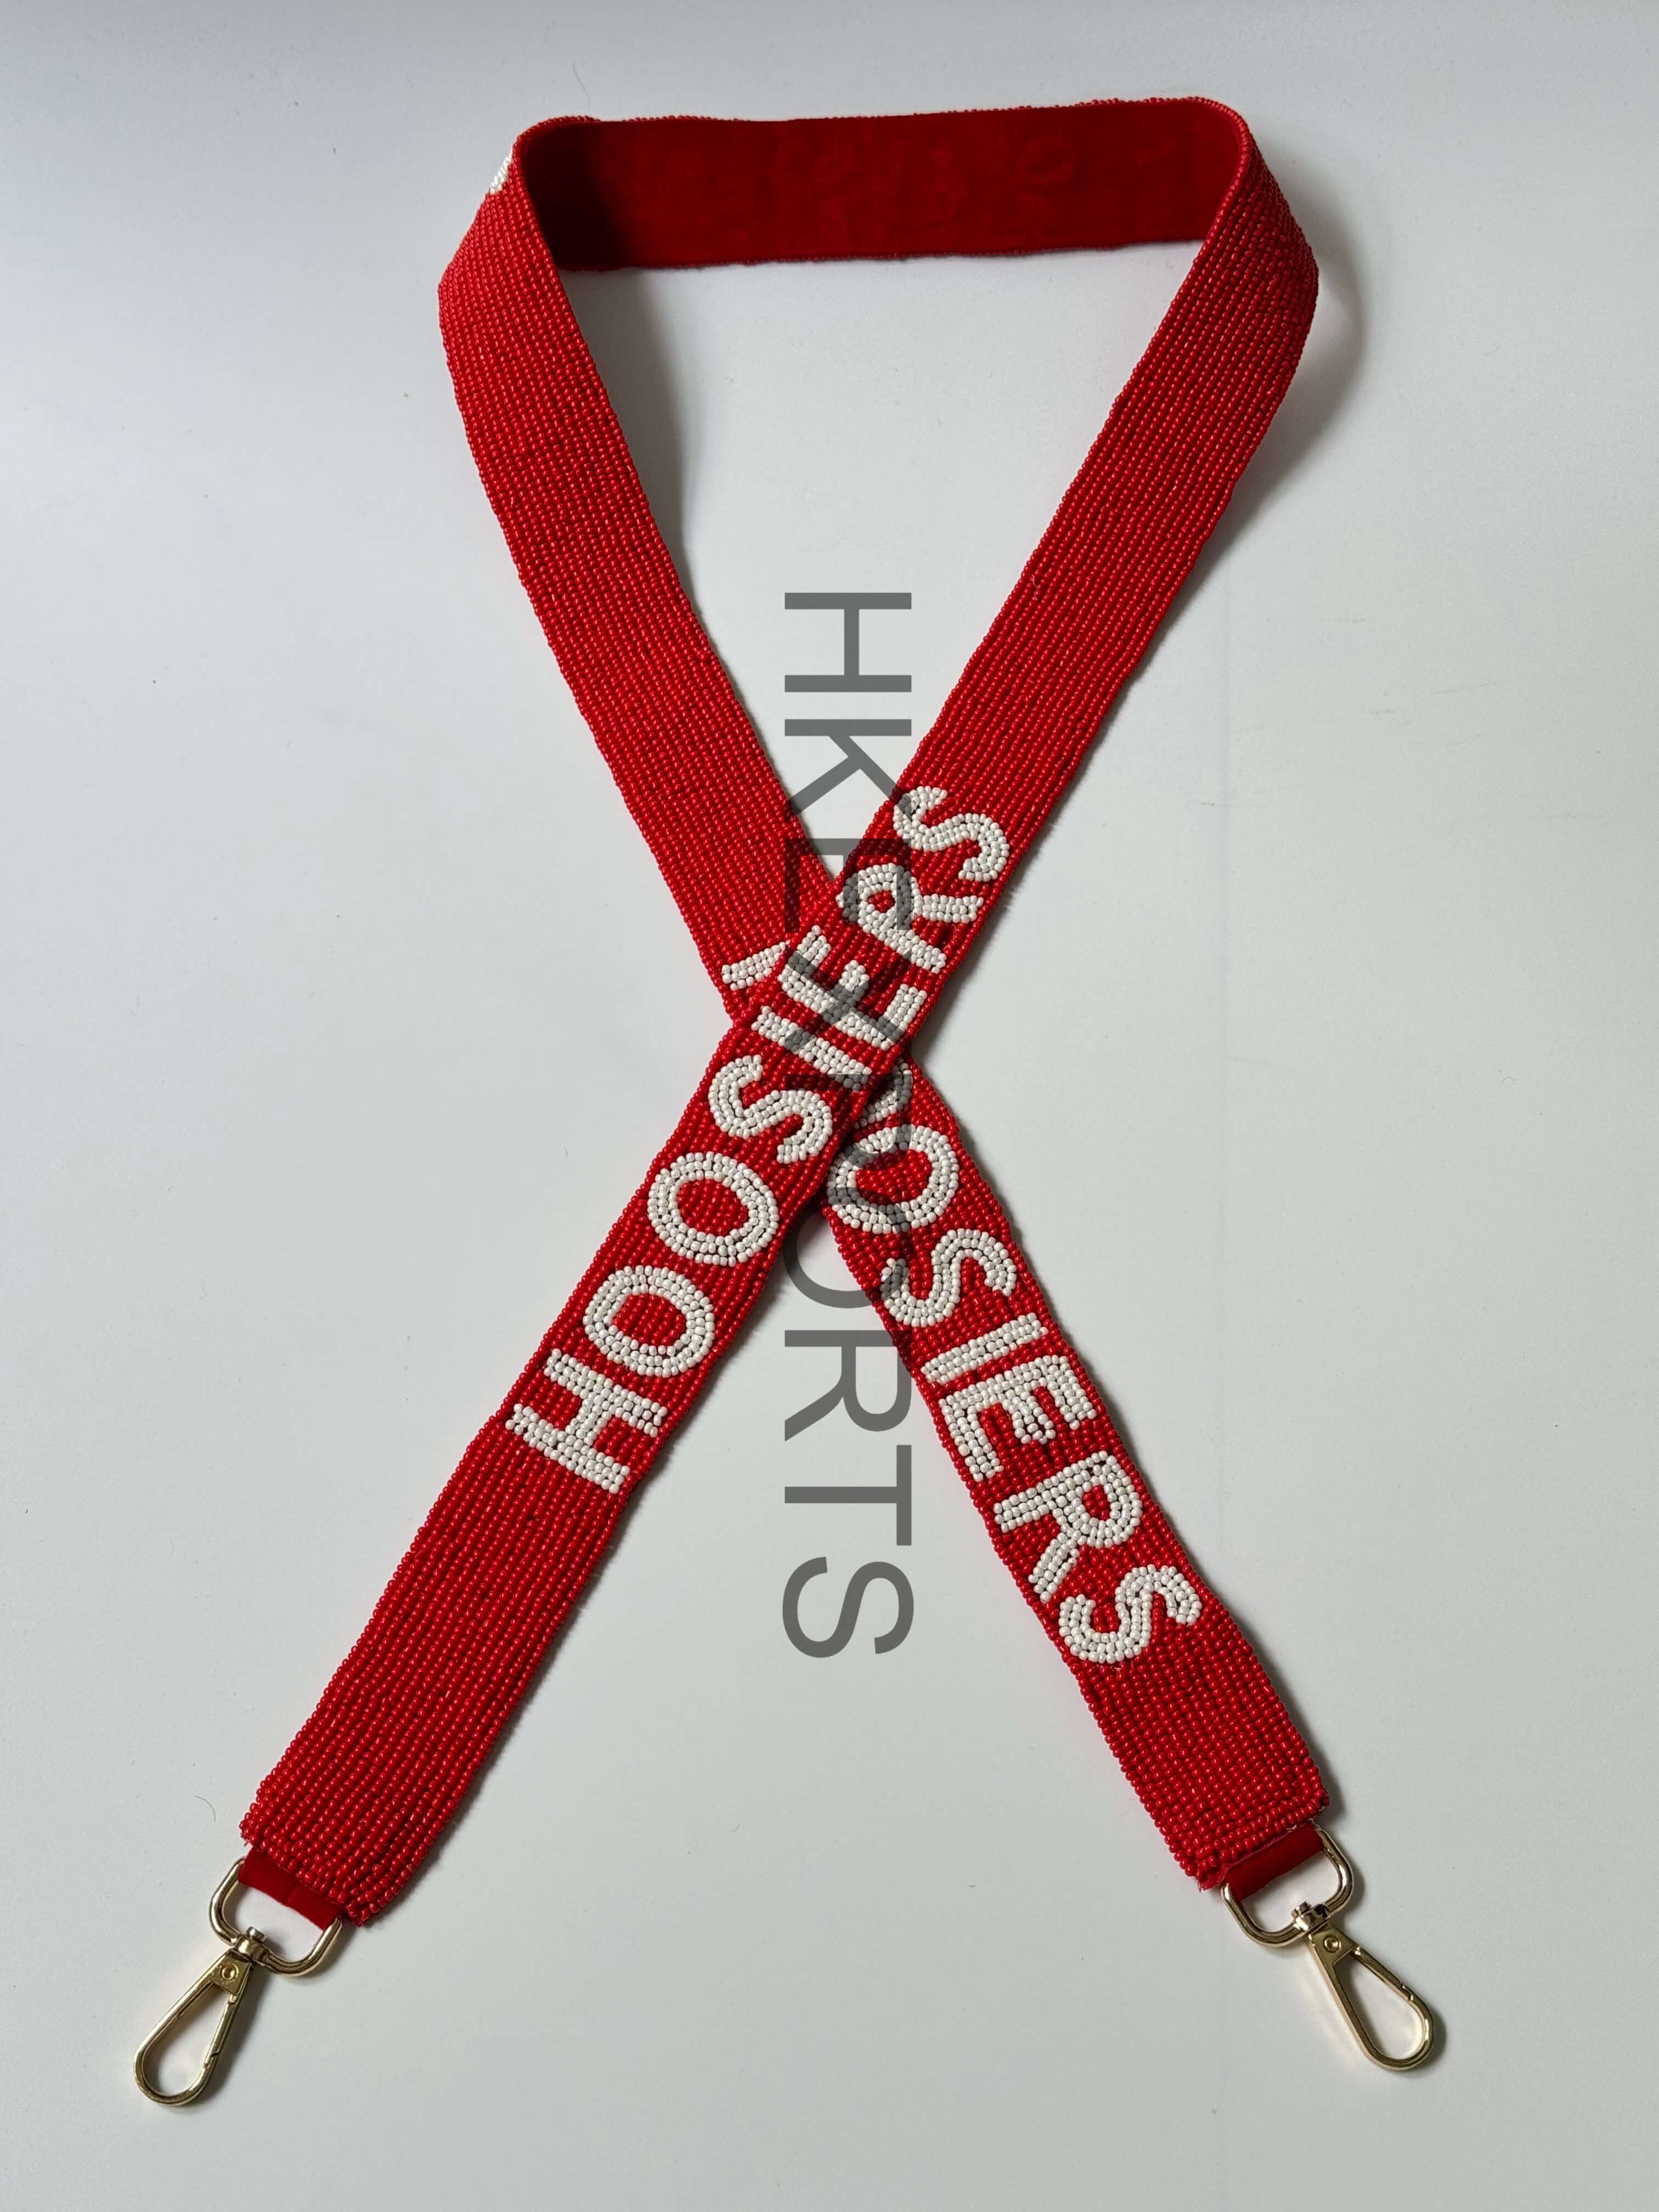 hoosiers-gameday-beaded-strap-show-your-team-spirit-in-style